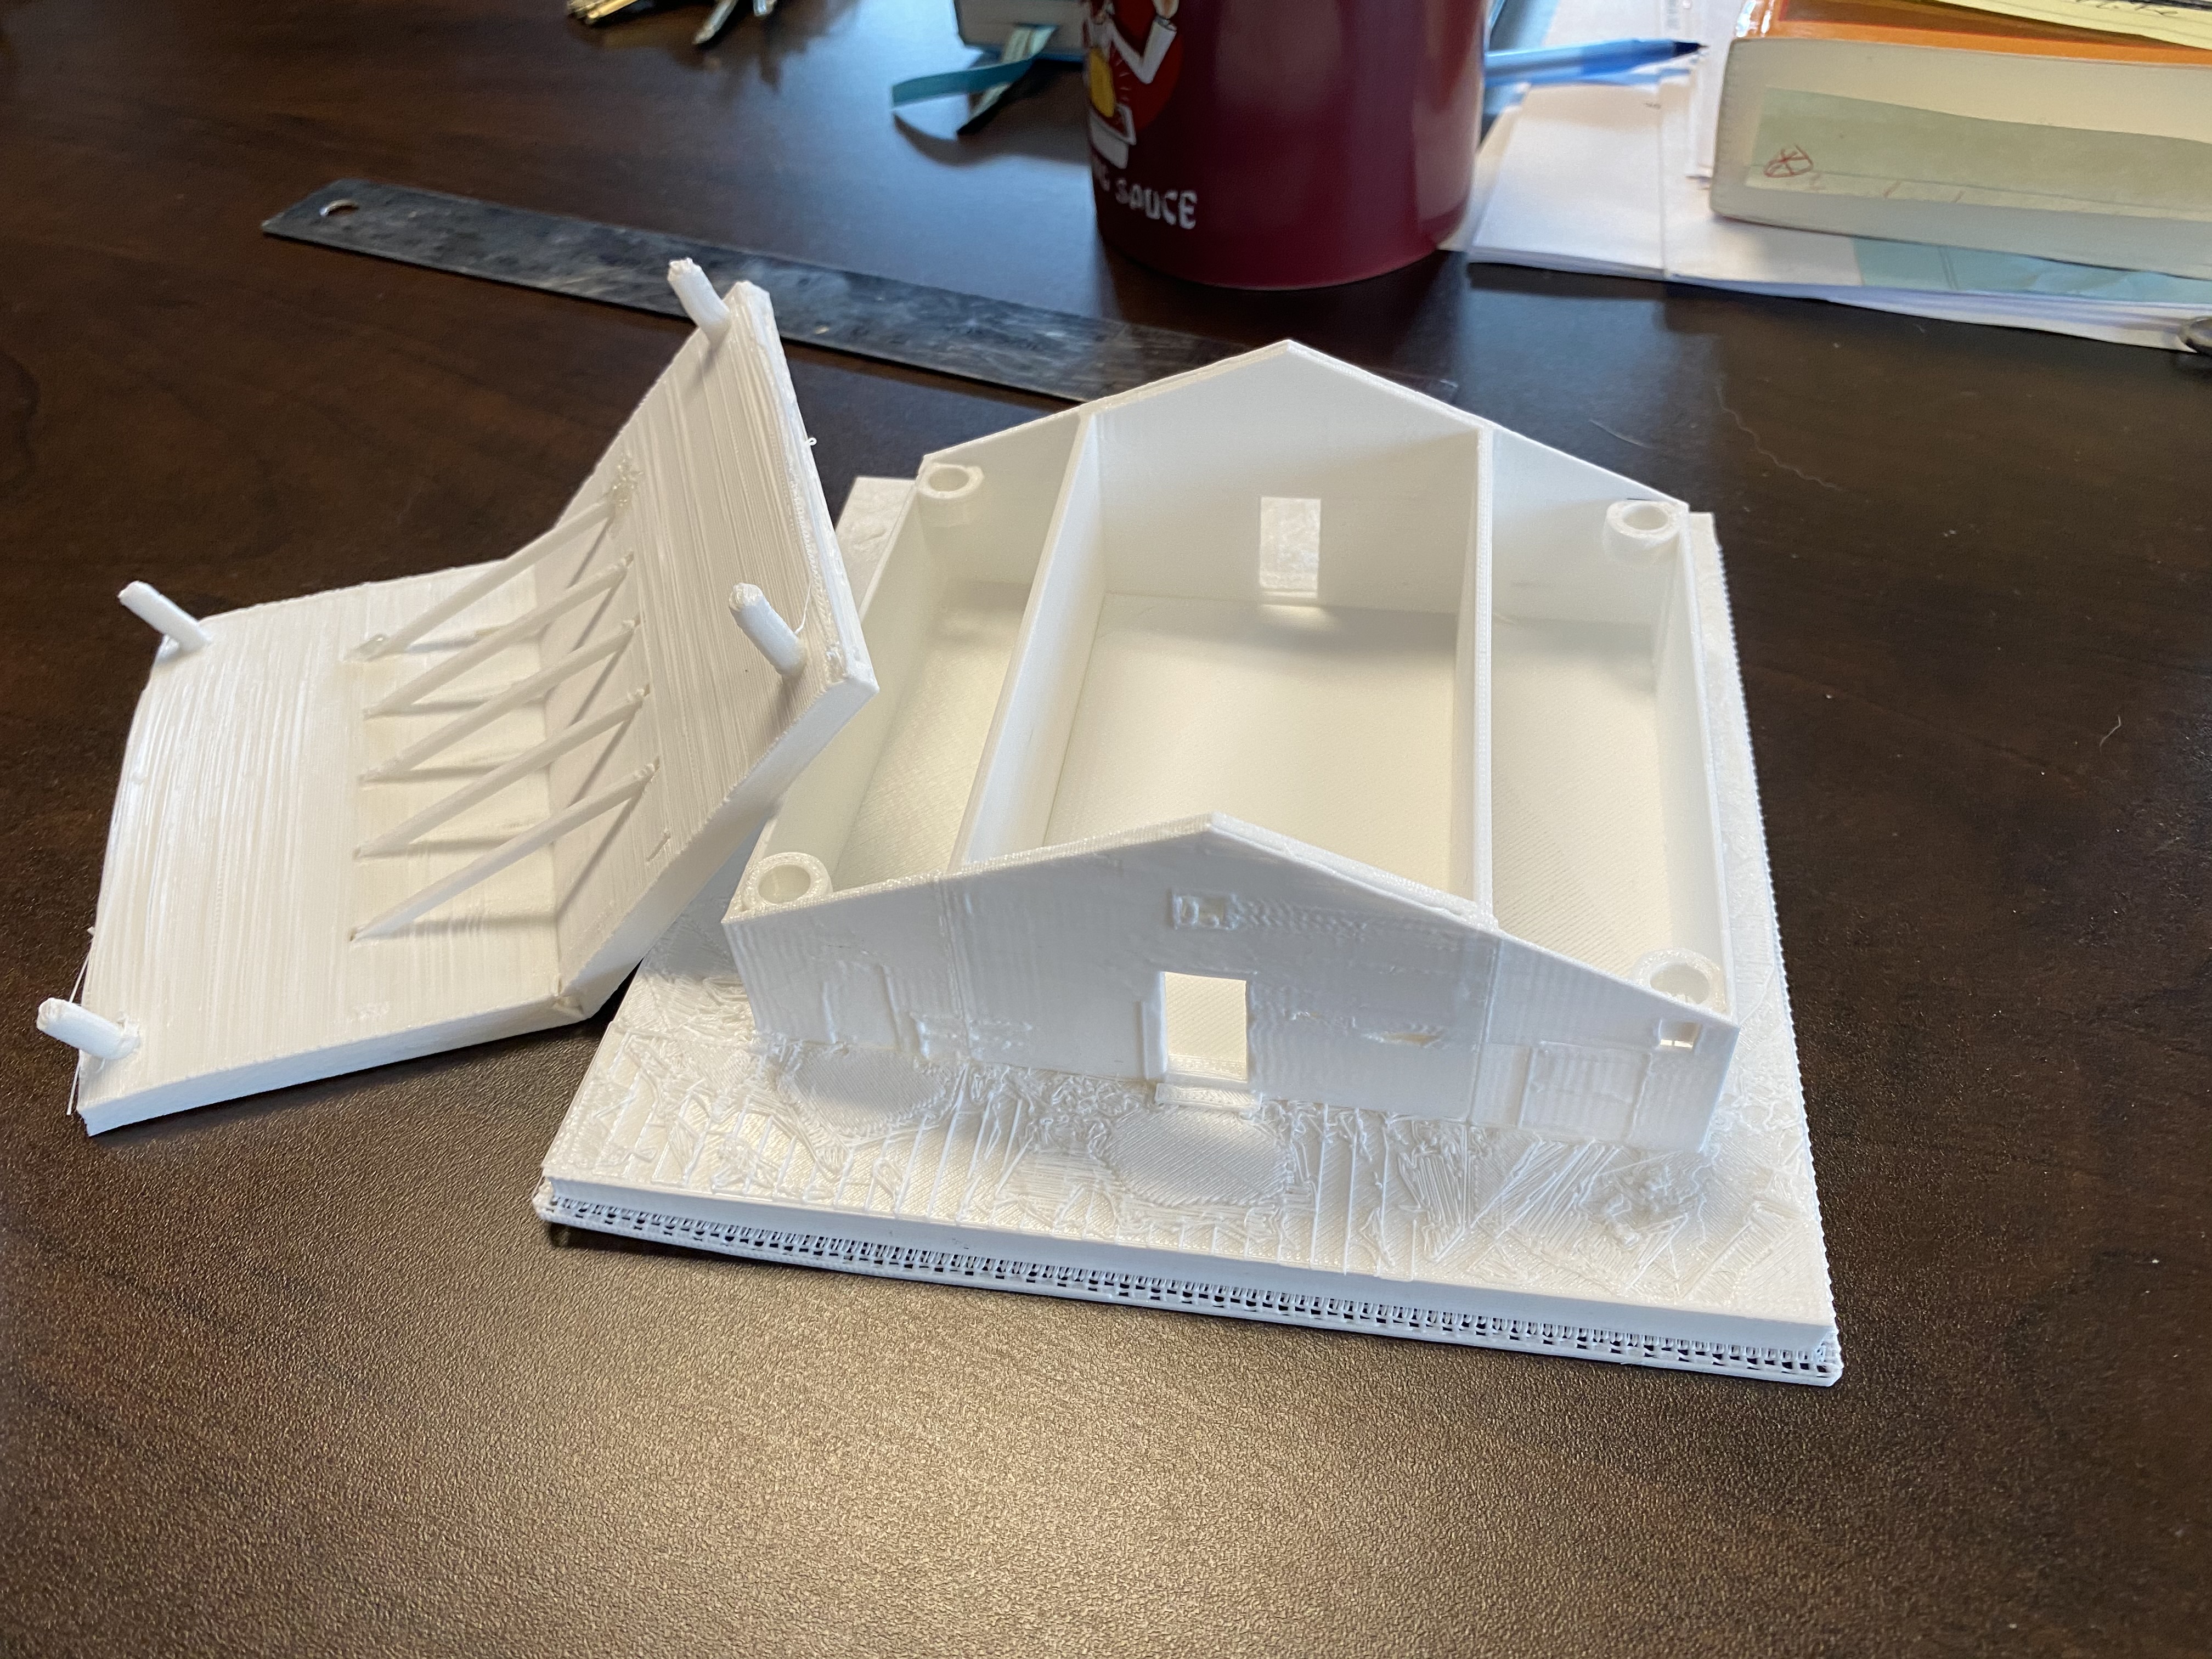 3D printed model of the Bonehouse created using the laser scanning data